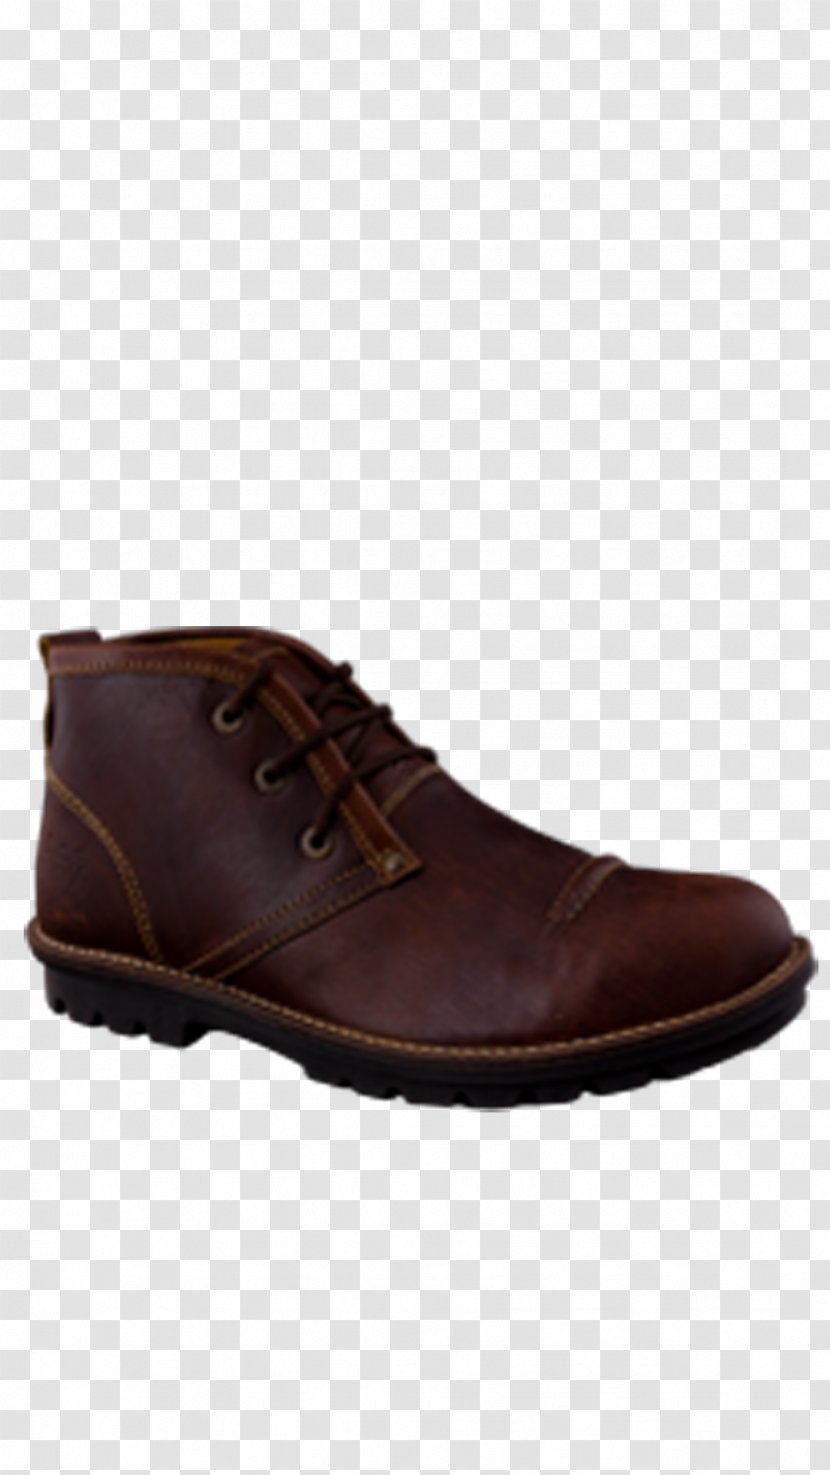 Chukka Boot Shoe Ankle Brown - Outdoor Transparent PNG